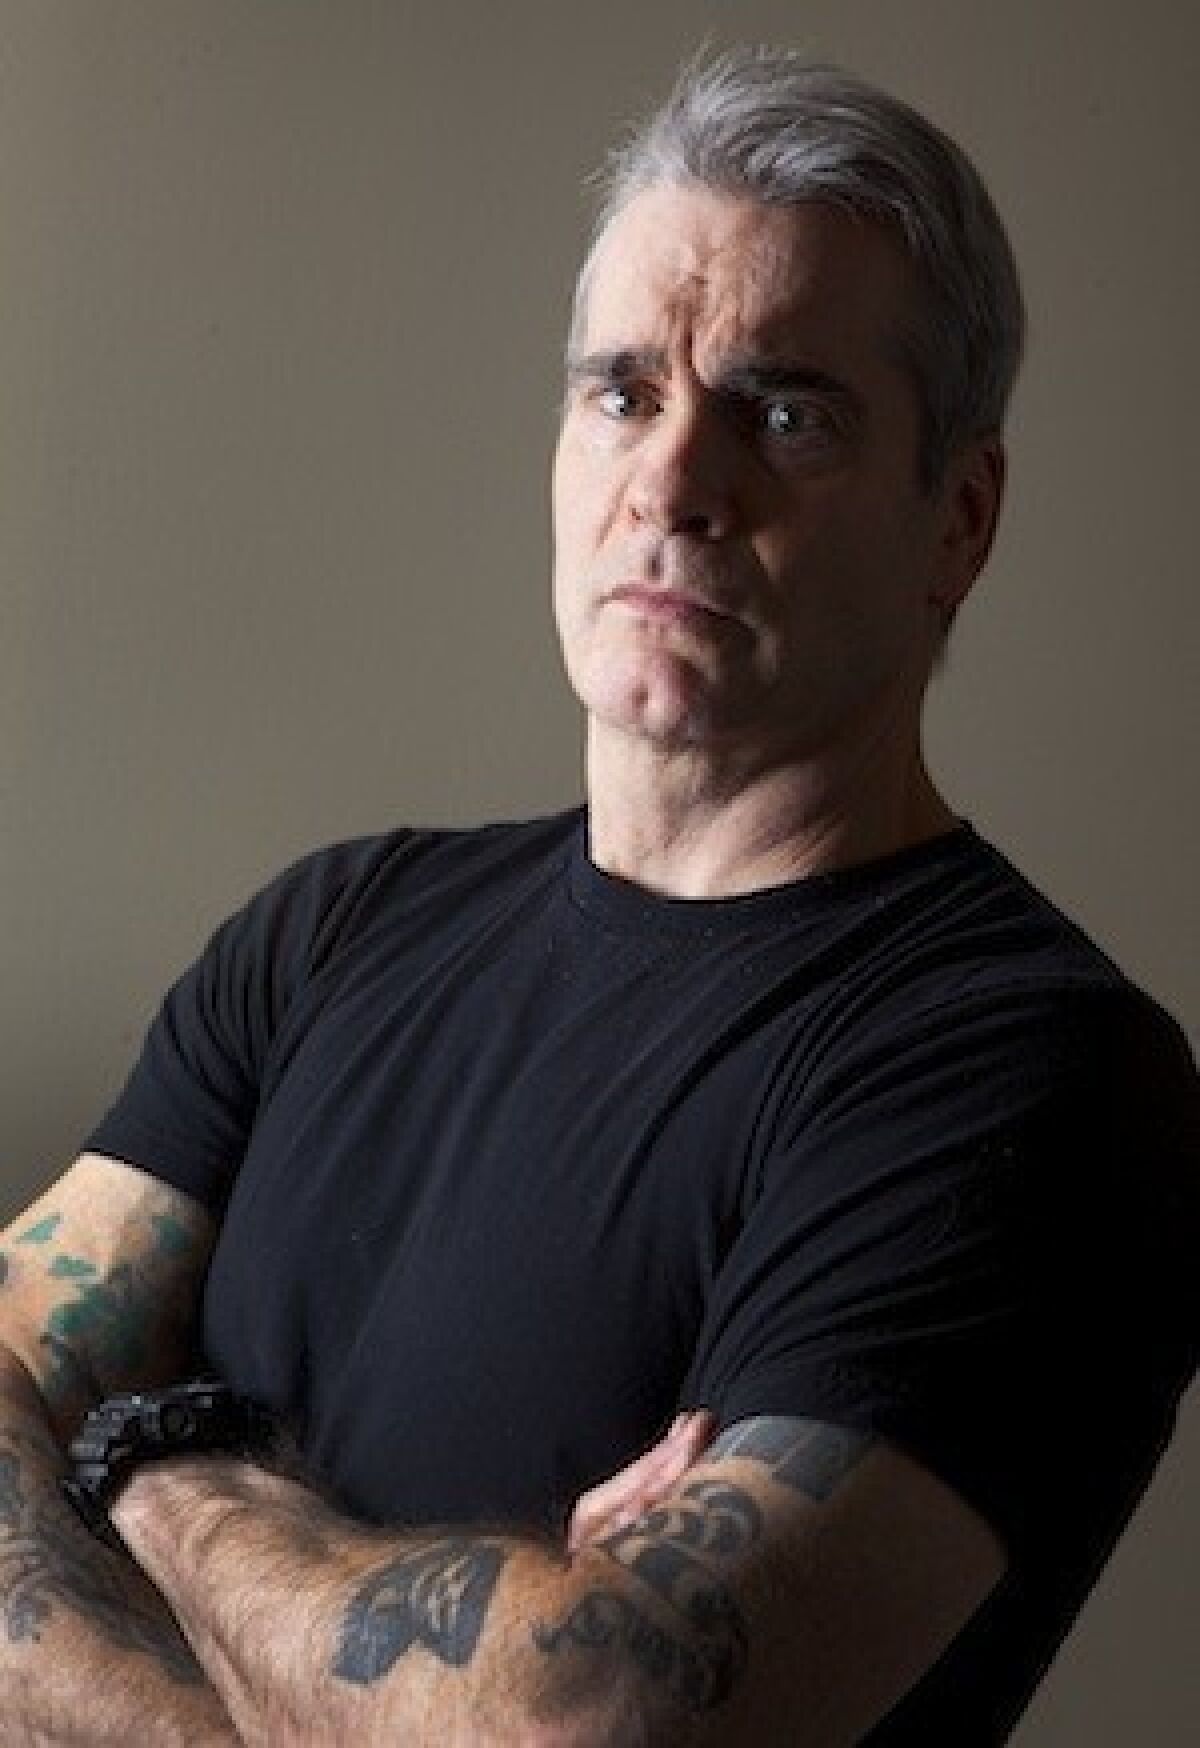 Henry Rollins, L.A.'s hard-core punk veteran, will talk about why he travels at the L.A. Times Travel Show on Sunday.